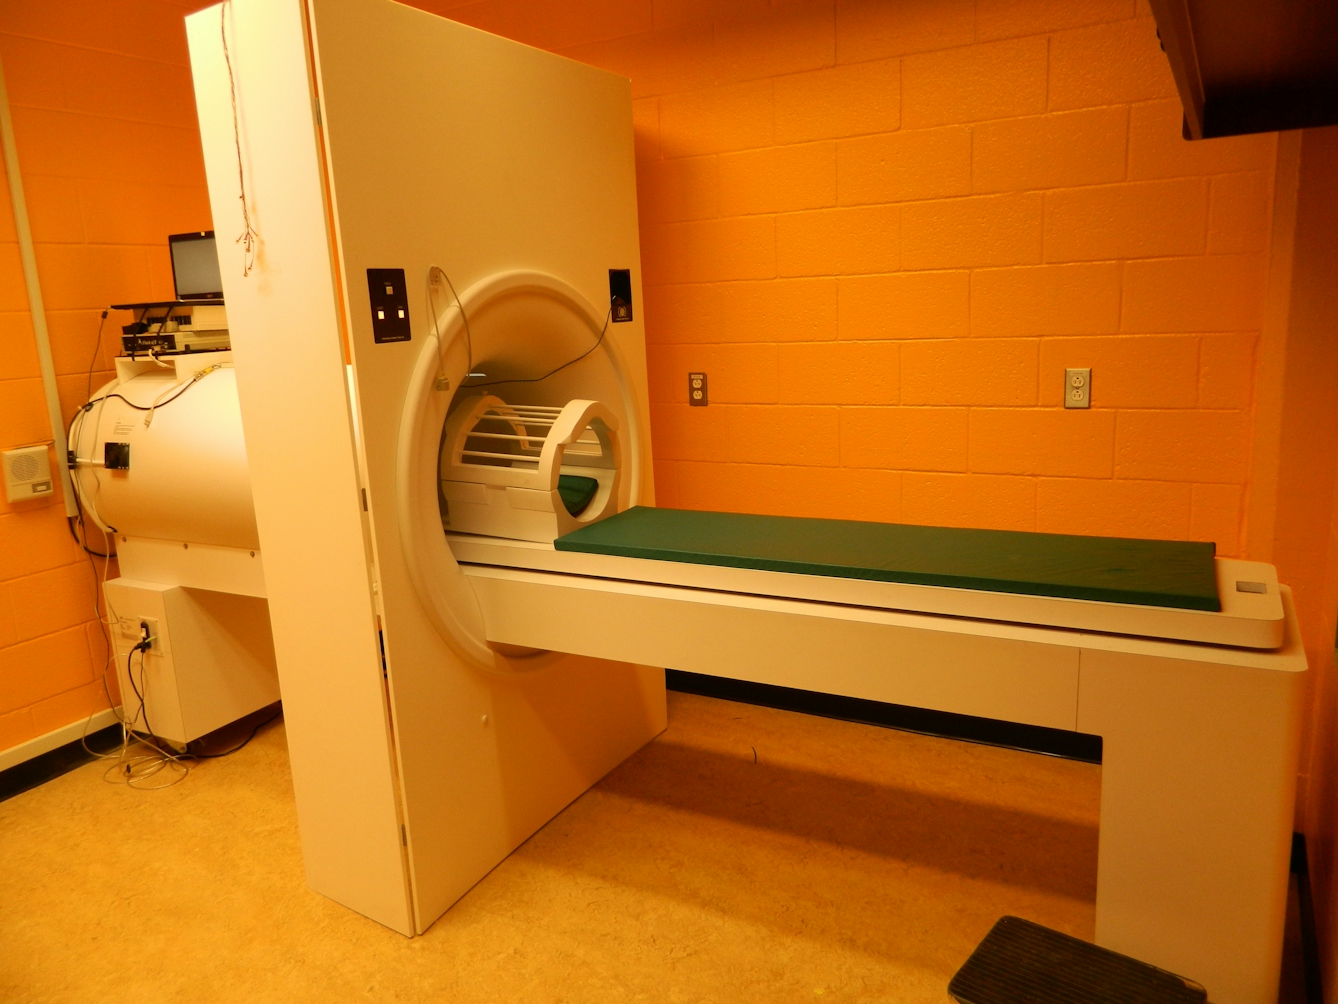 Framed colour photograph showing a fake MRI scanner.